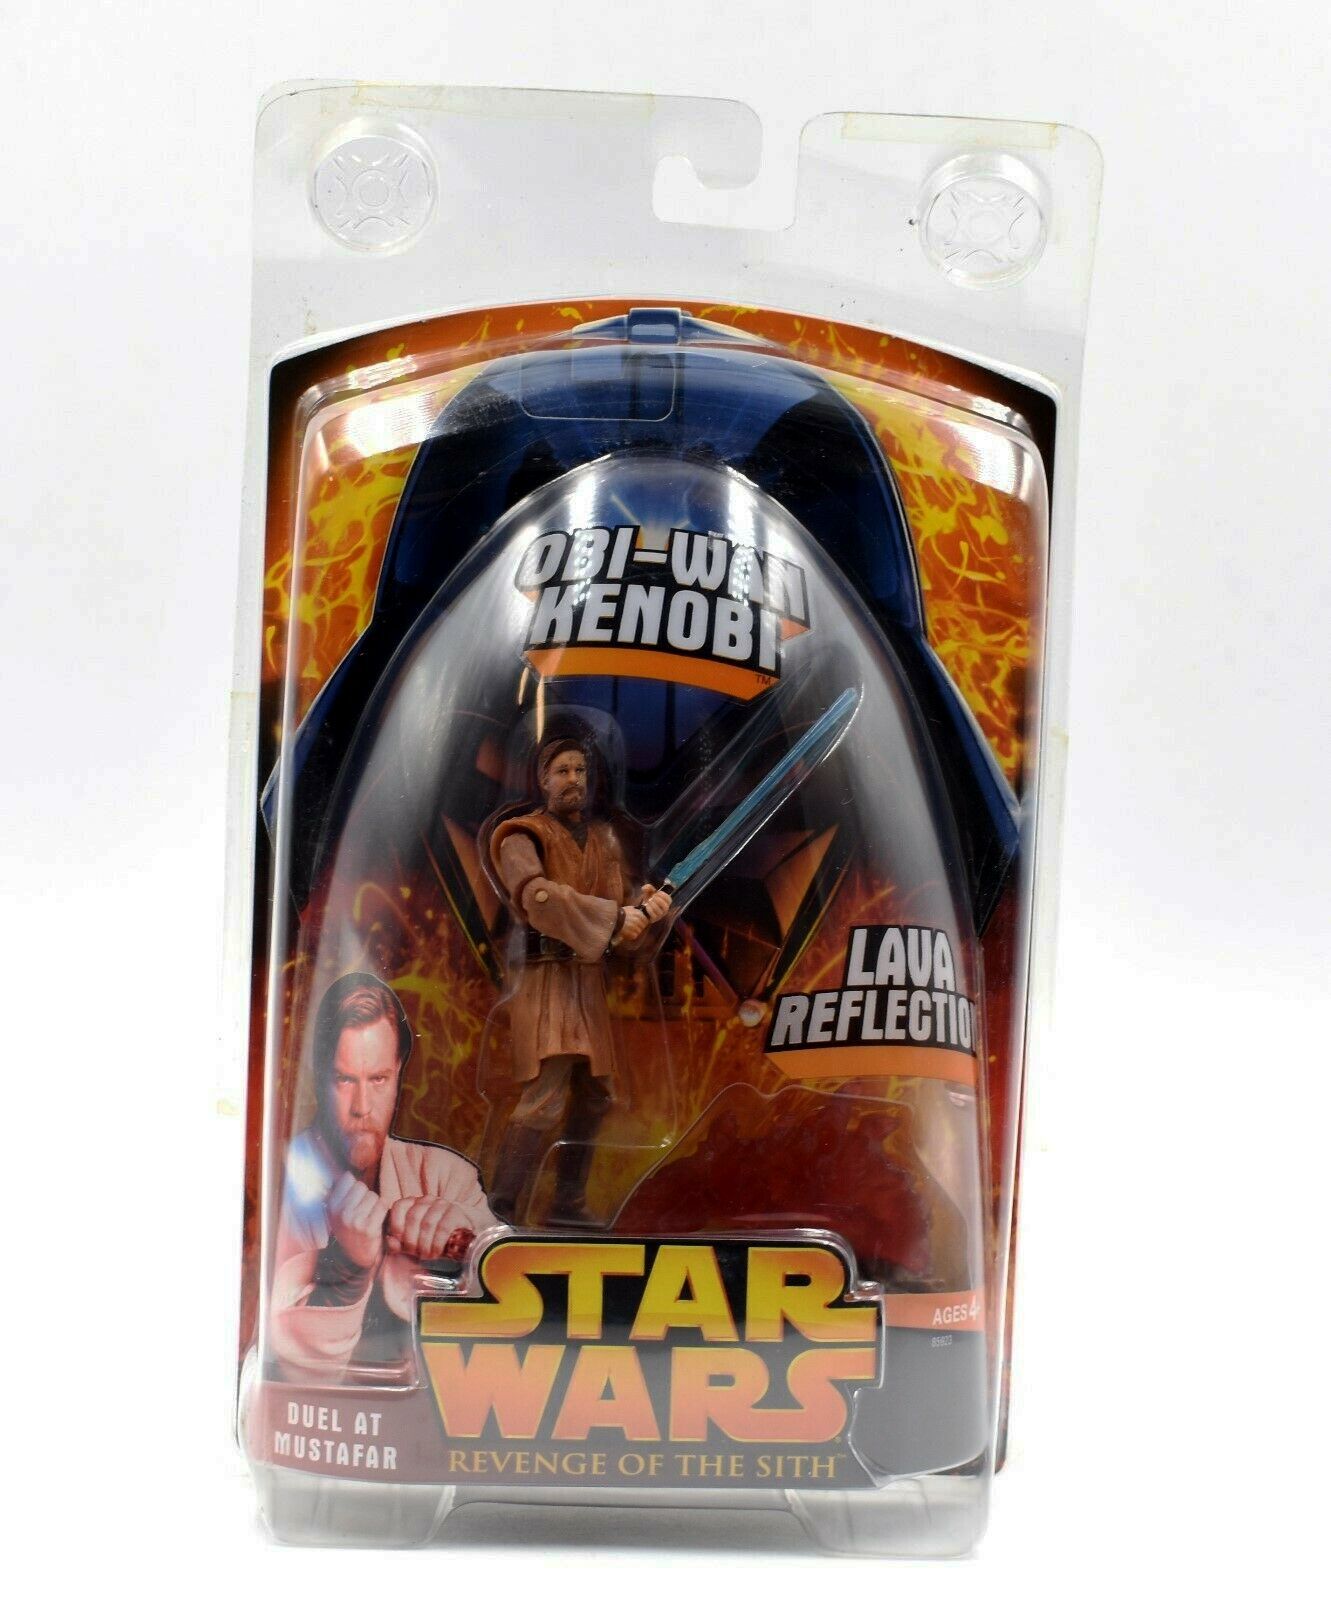 Star Wars Revenge Of The Sith Tin Exclusive Bonus Story Chase Card #3